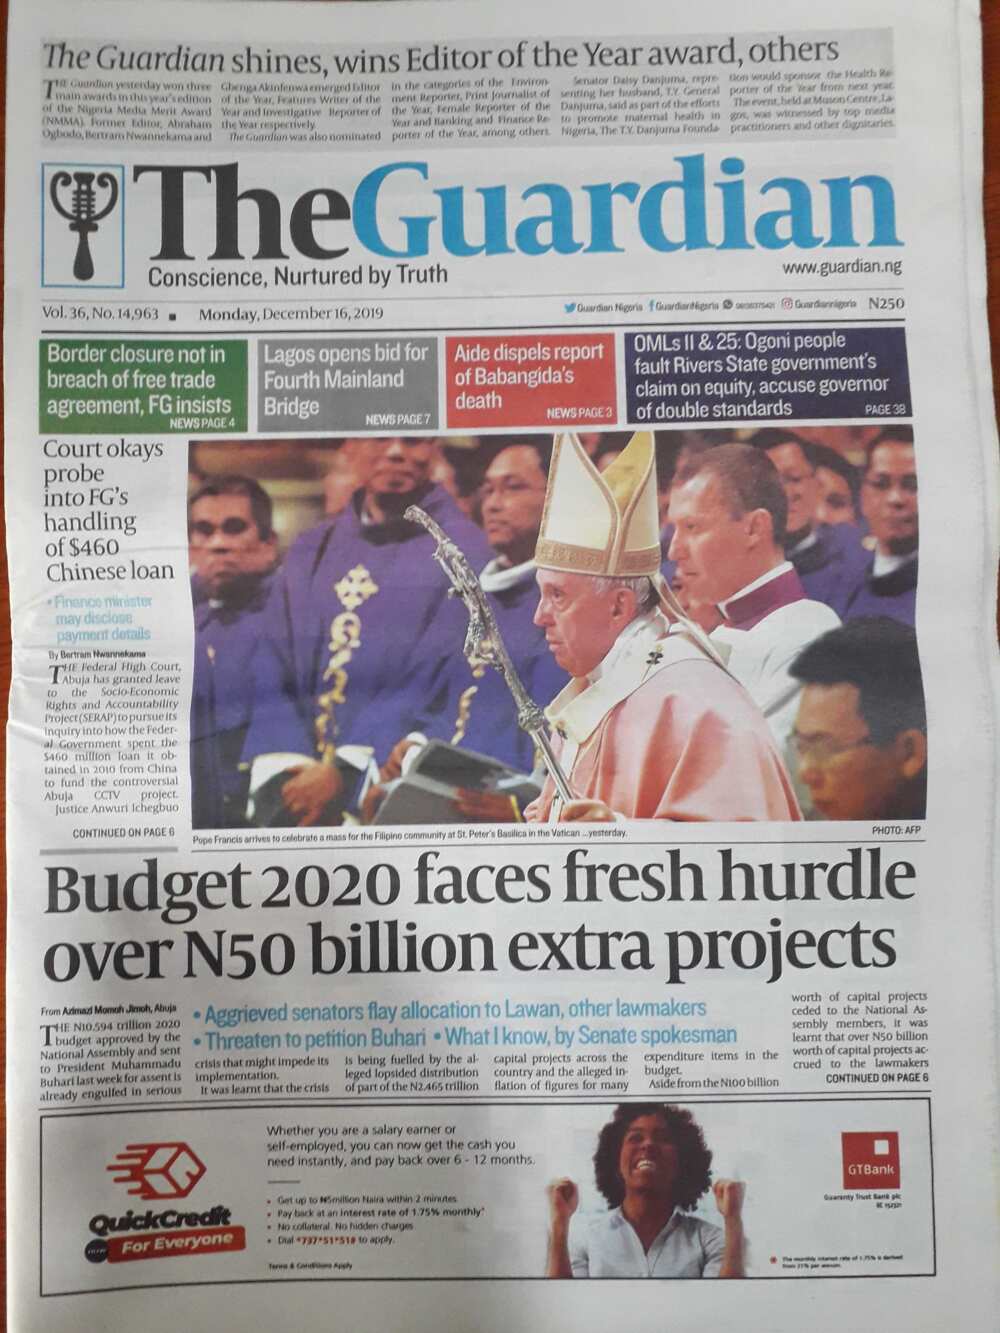 Newspapers review for Monday, December 16: Hurdles surround 2020 budget over N50b extra projects